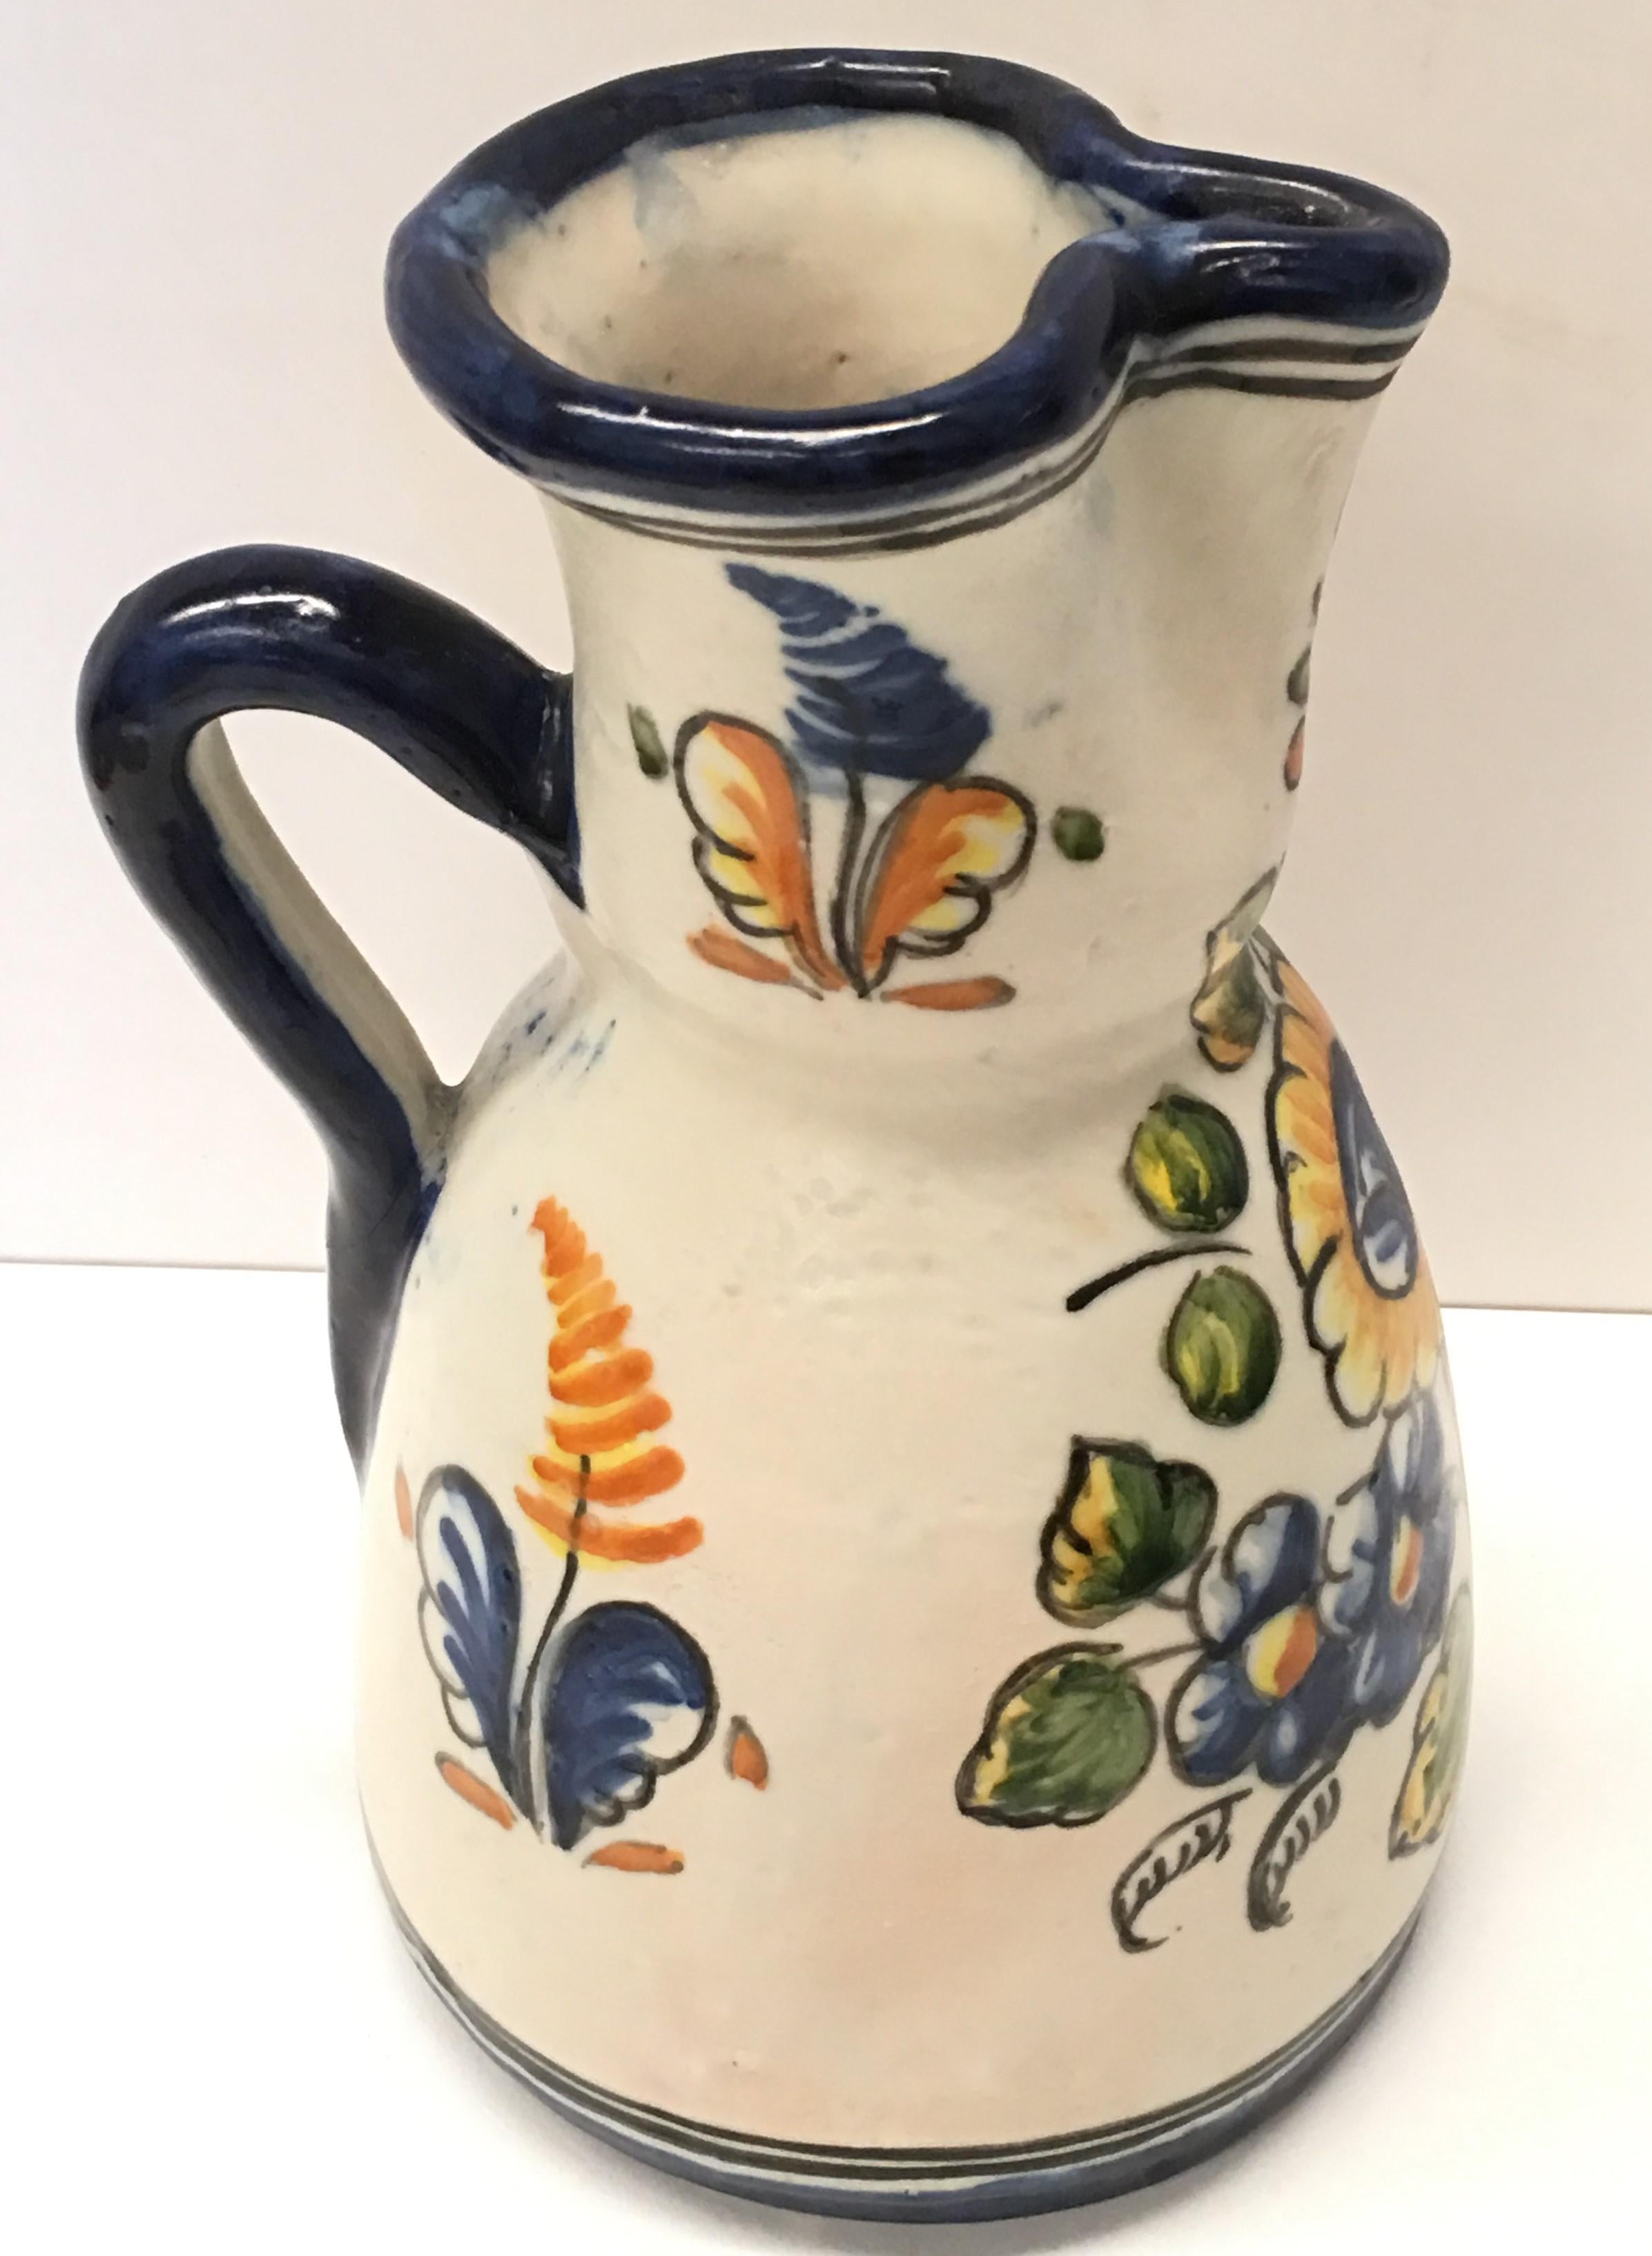 19th century French glazed terracotta pitcher with beautifuls fleurs.